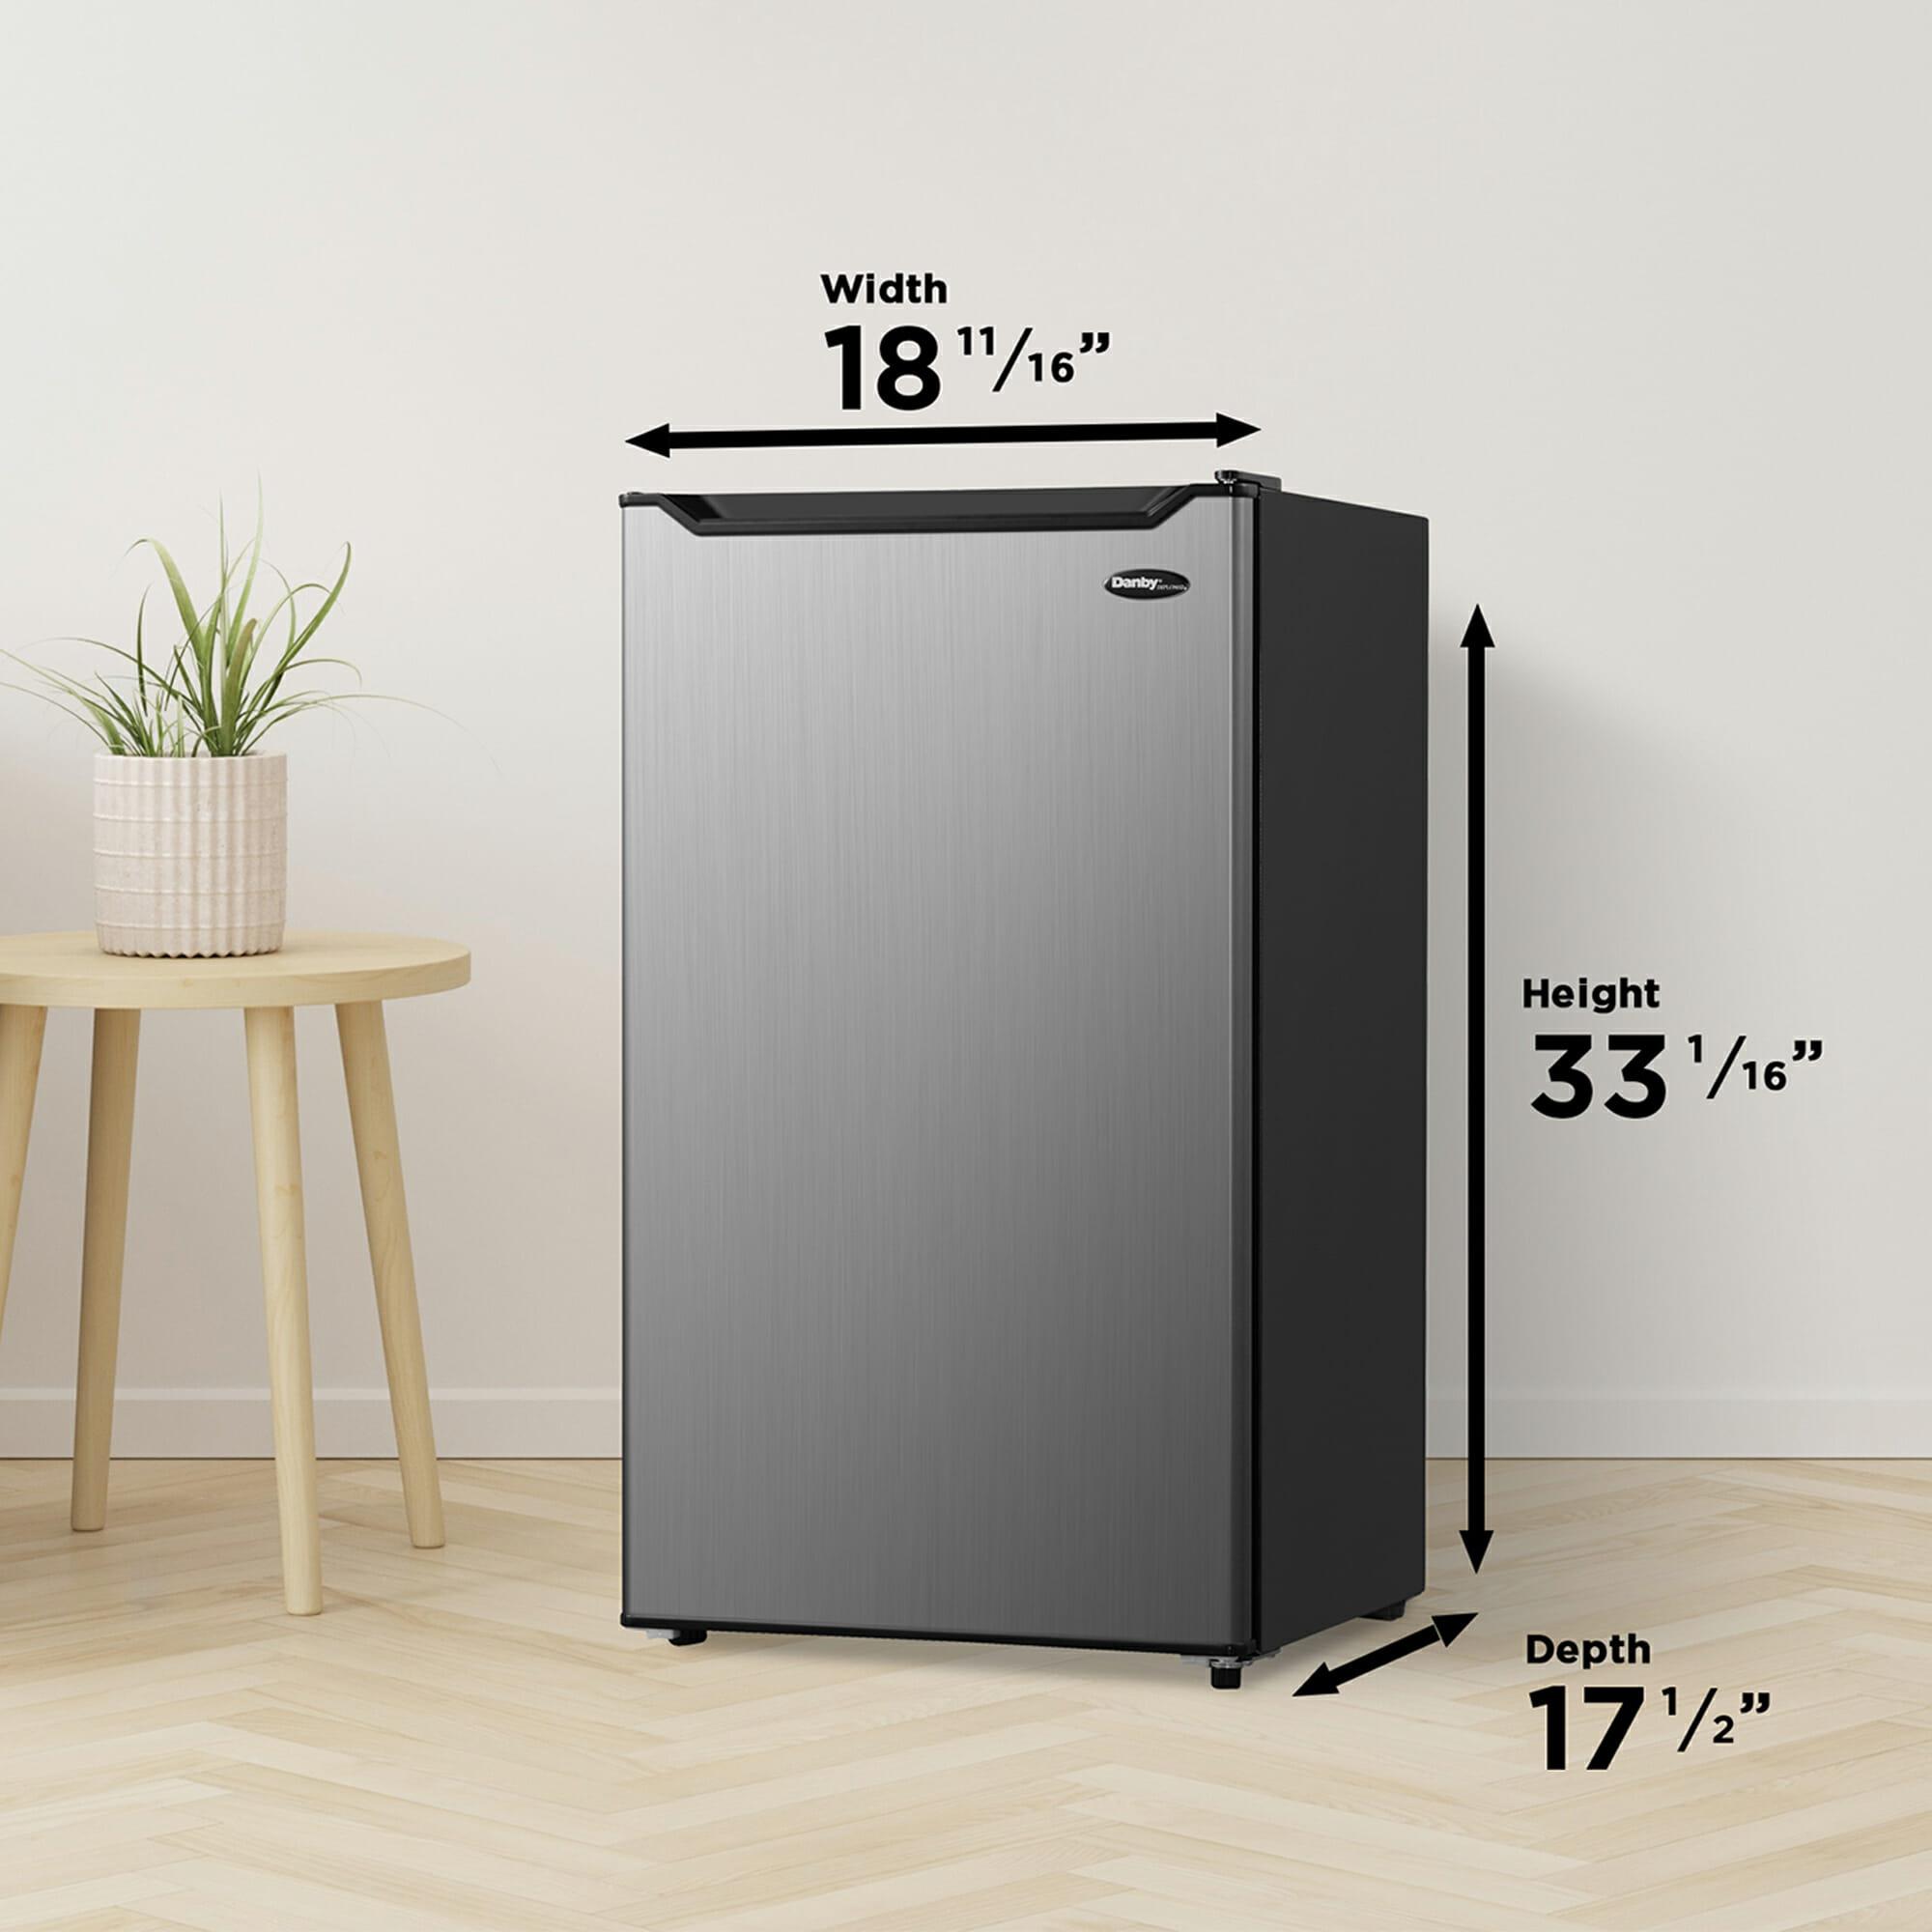 Danby 3.2 cu. ft. Compact Fridge in Stainless Steel